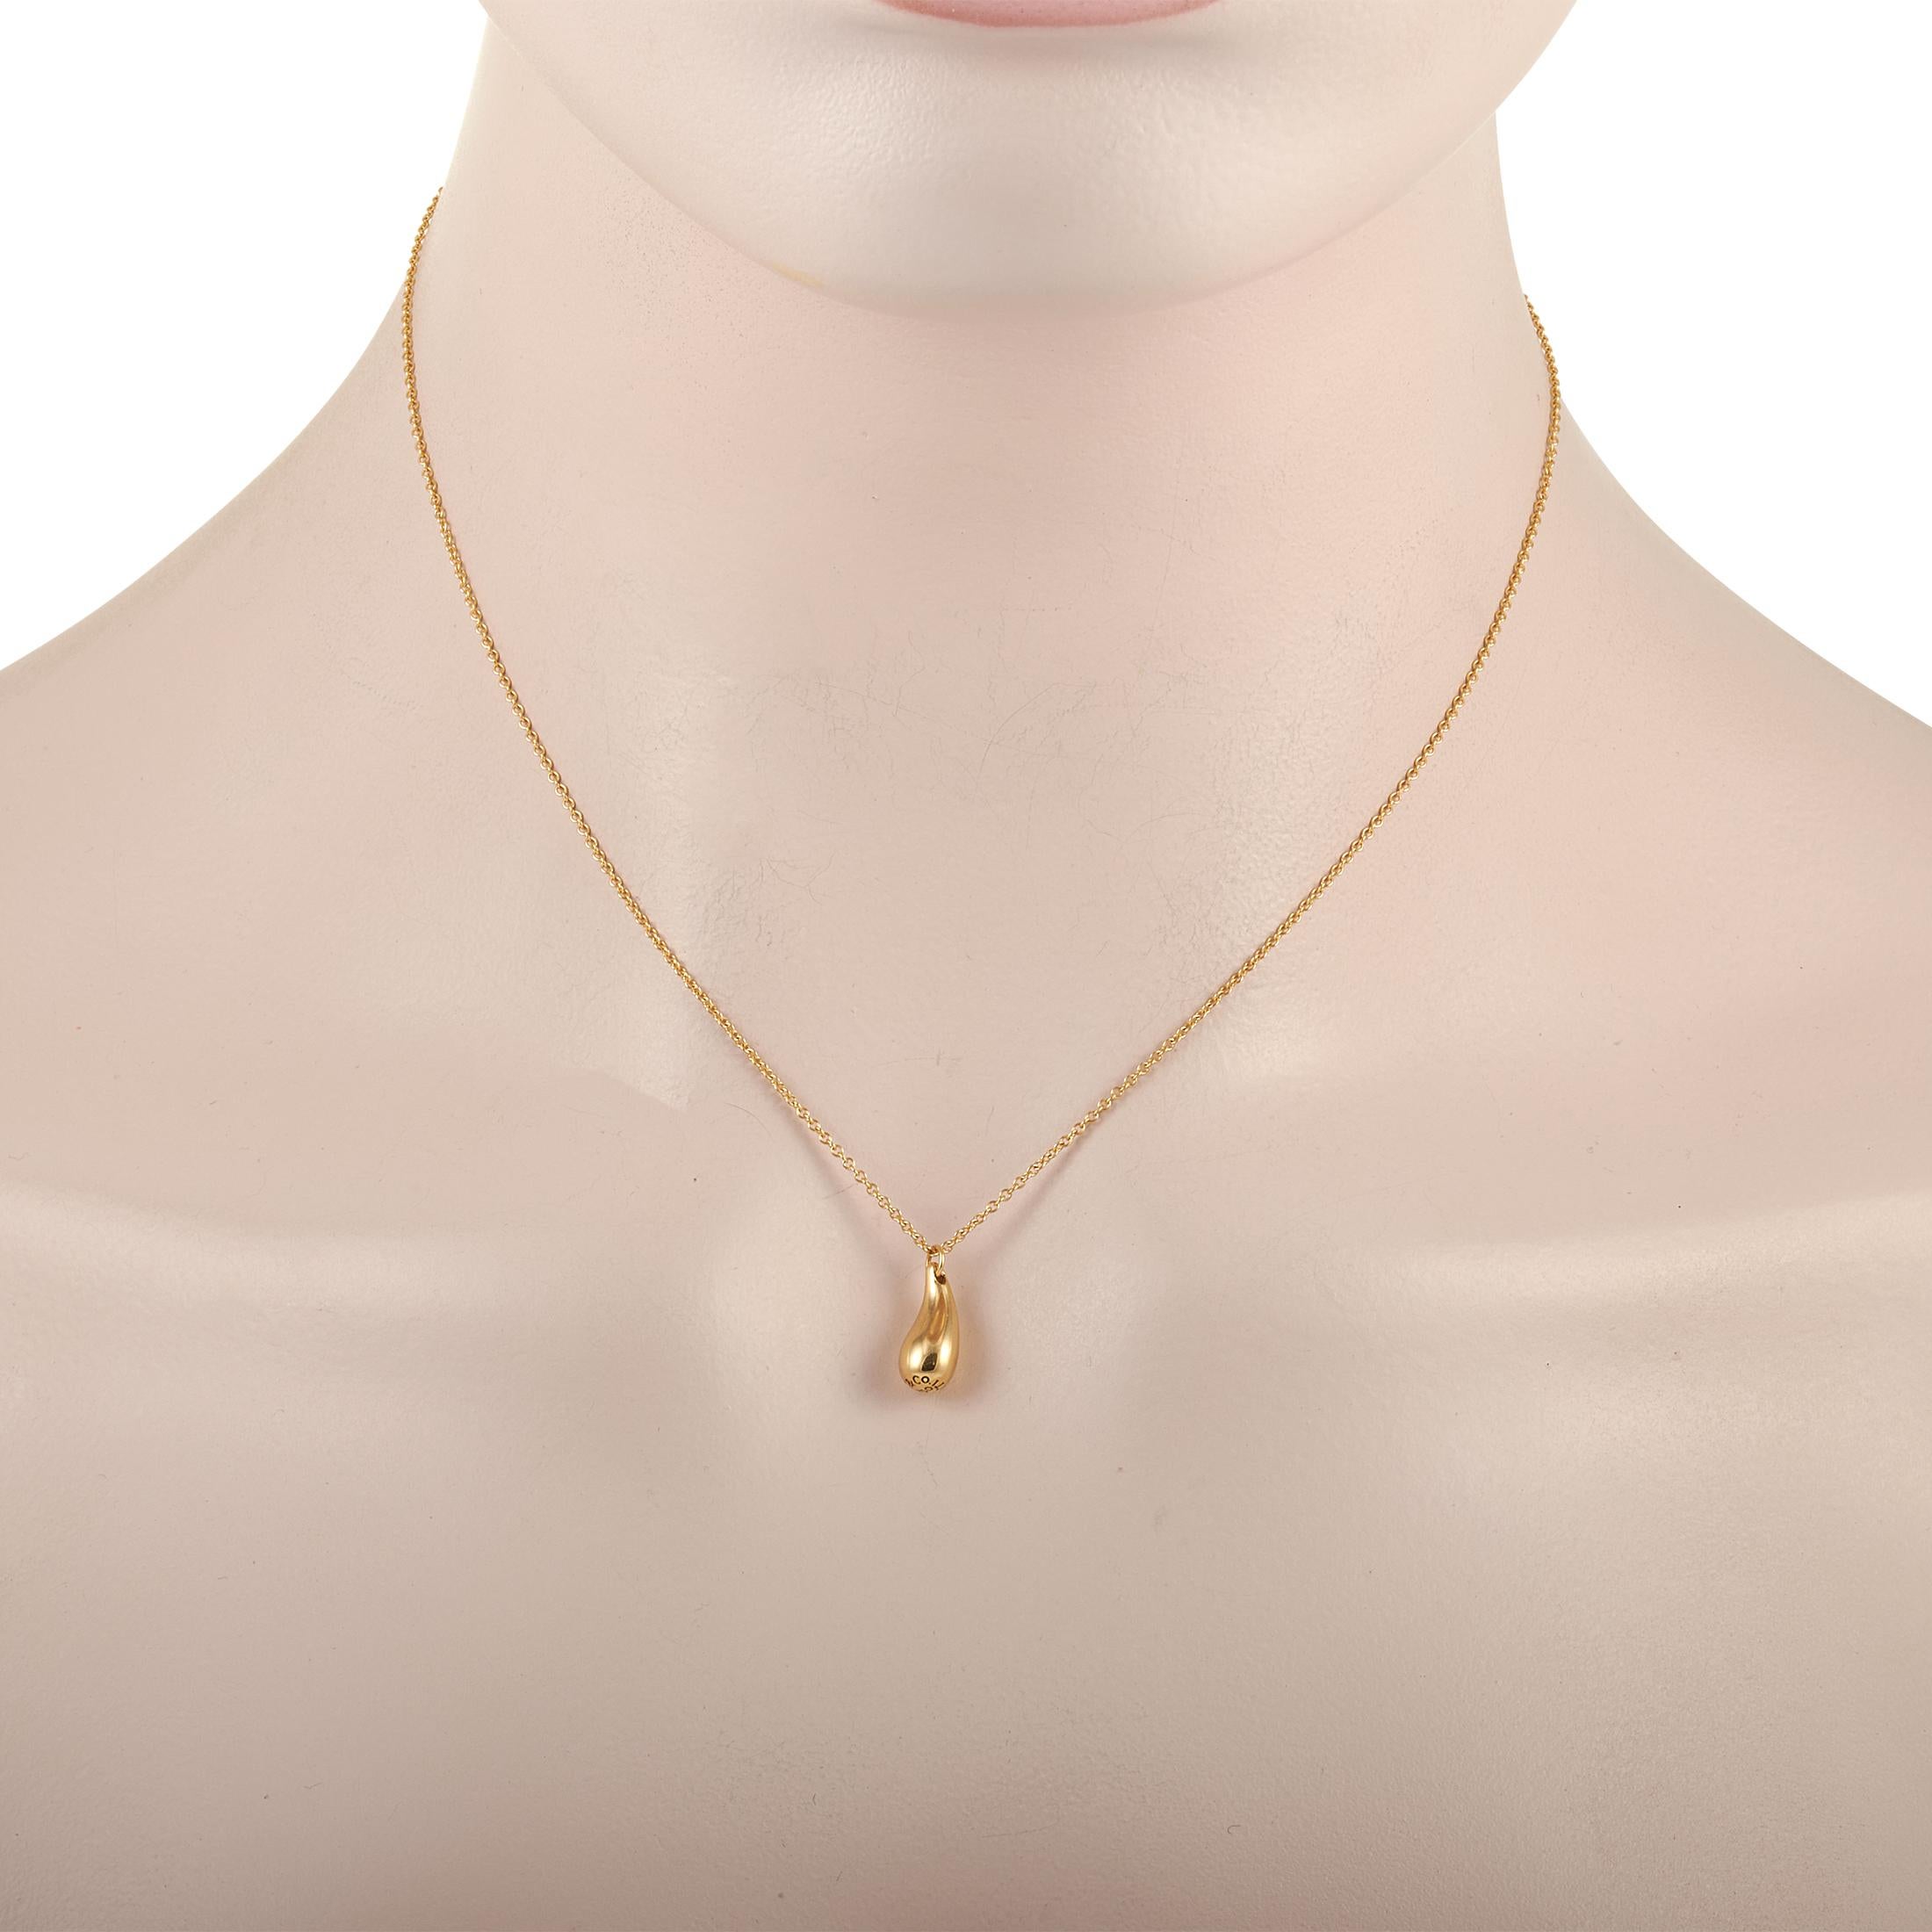 The Tiffany & Co. Elsa Peretti 18K Yellow Gold Teardrop Pendant displays a minimalist yet artsy vibe. The 15-inch lightweight cable chain in 18K yellow gold holds a solid 18K yellow gold pendant in the shape of a dewdrop or teardrop. The pendant